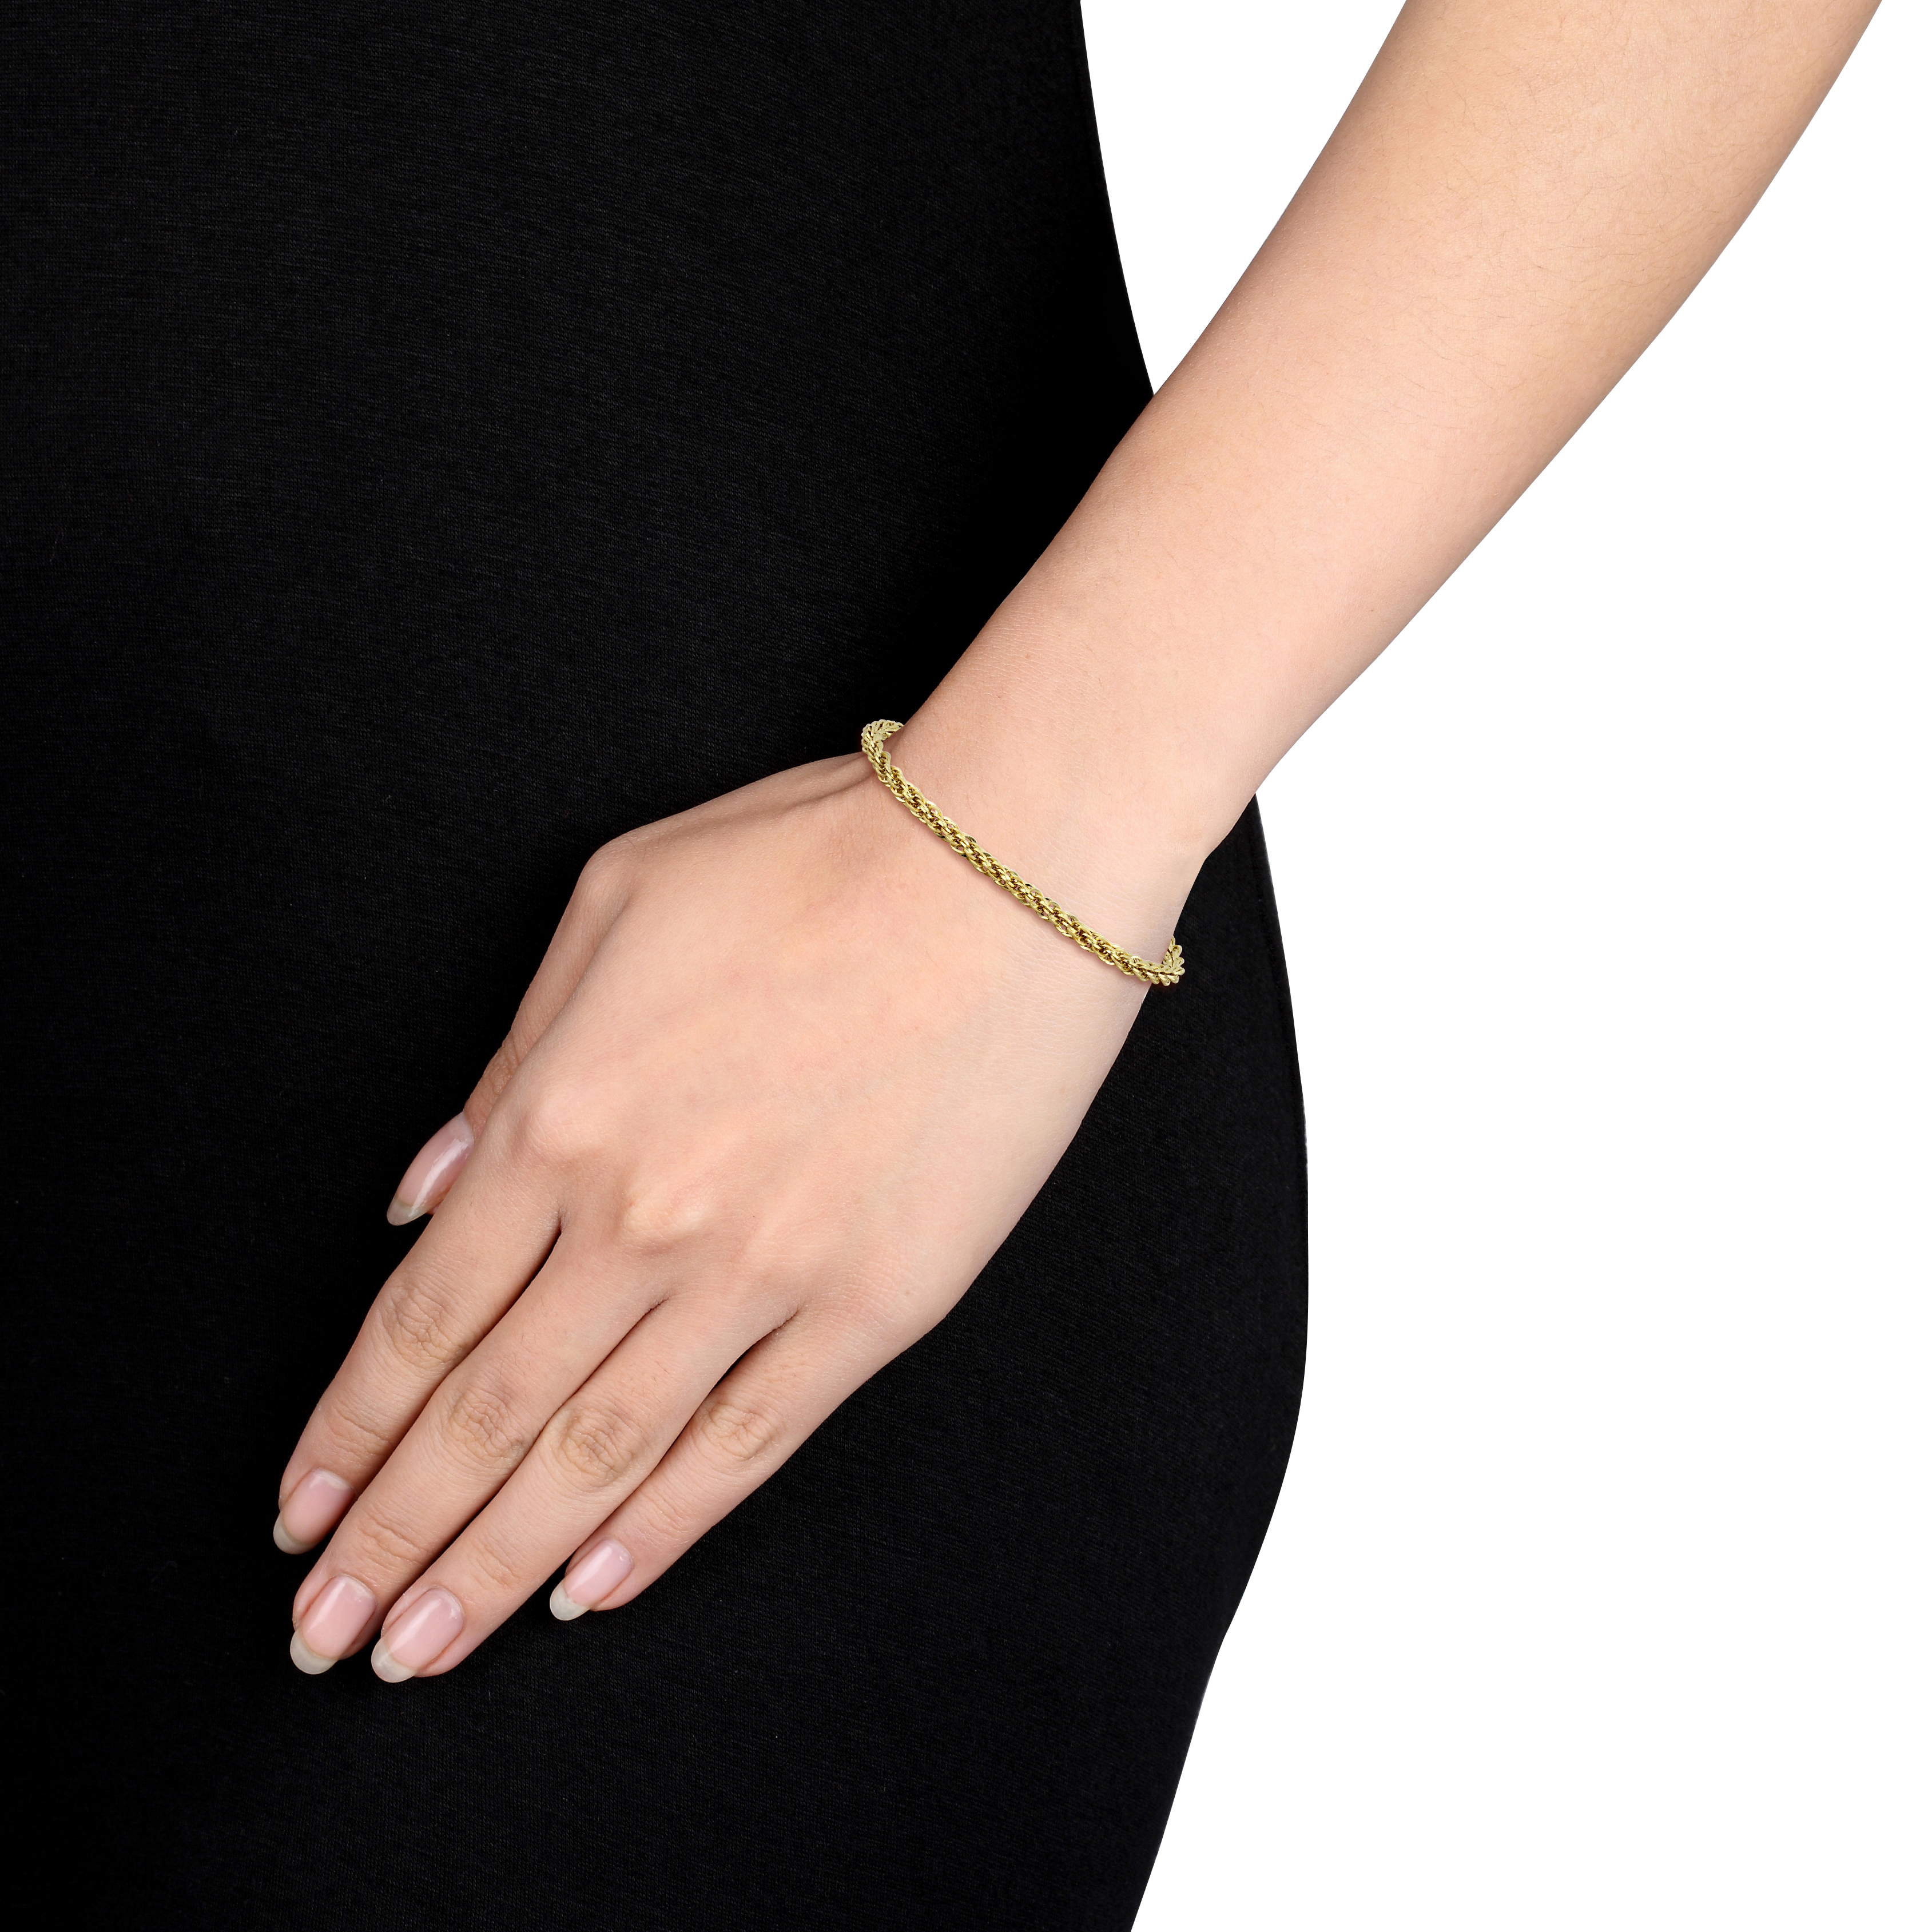 4mm Infinity Rope Chain Bracelet in 14k Yellow Gold - 7.5 in.